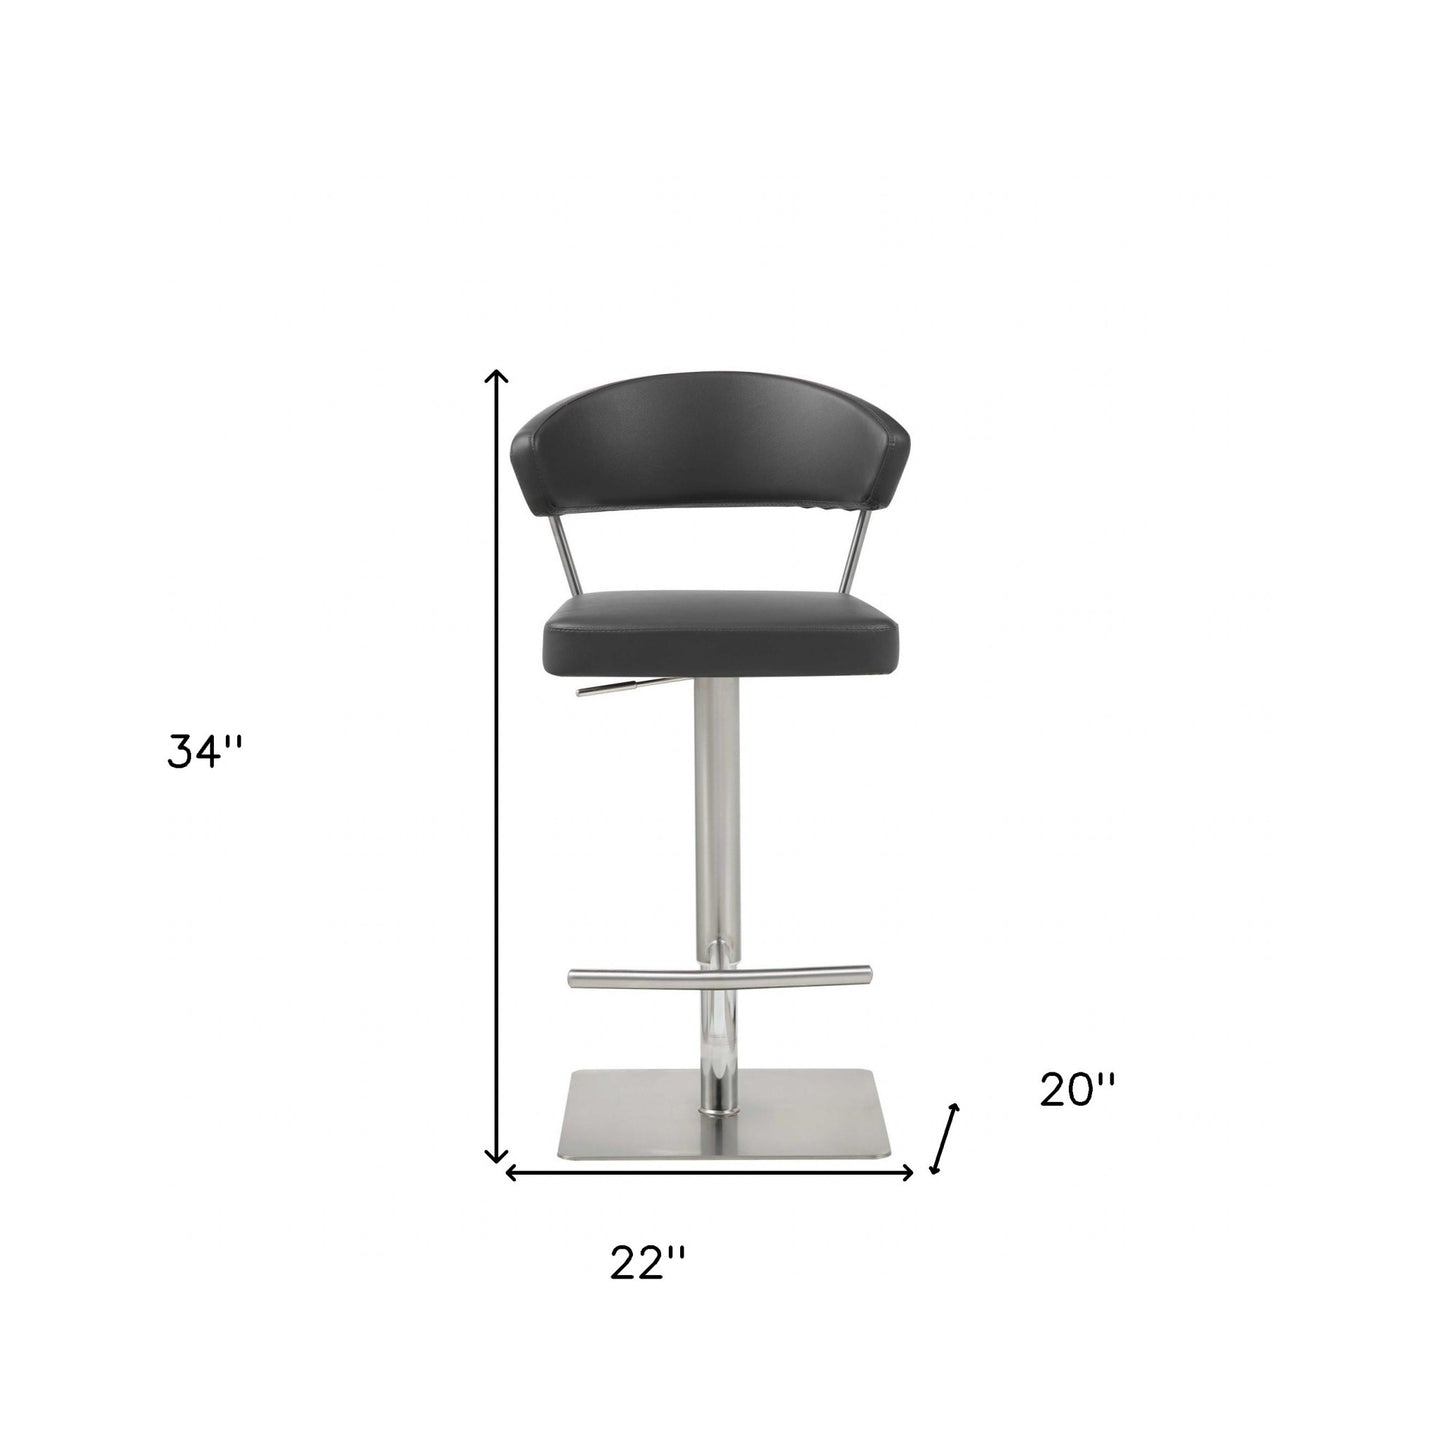 20 " Black And Silver Stainless Steel Bar Chair